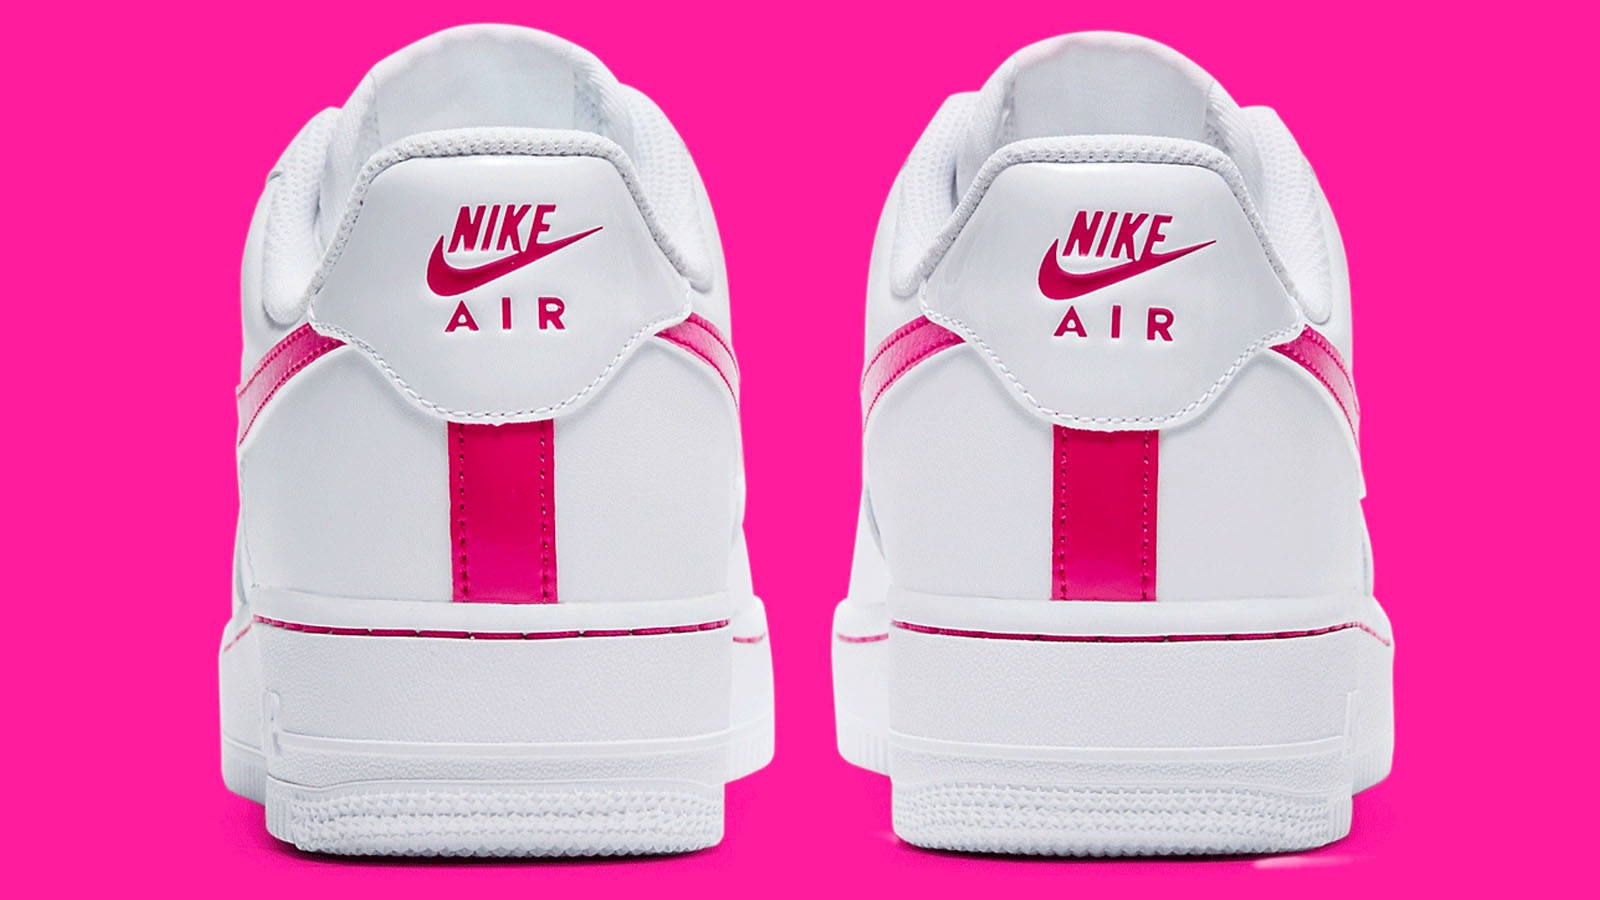 nike air force 1 with pink swoosh